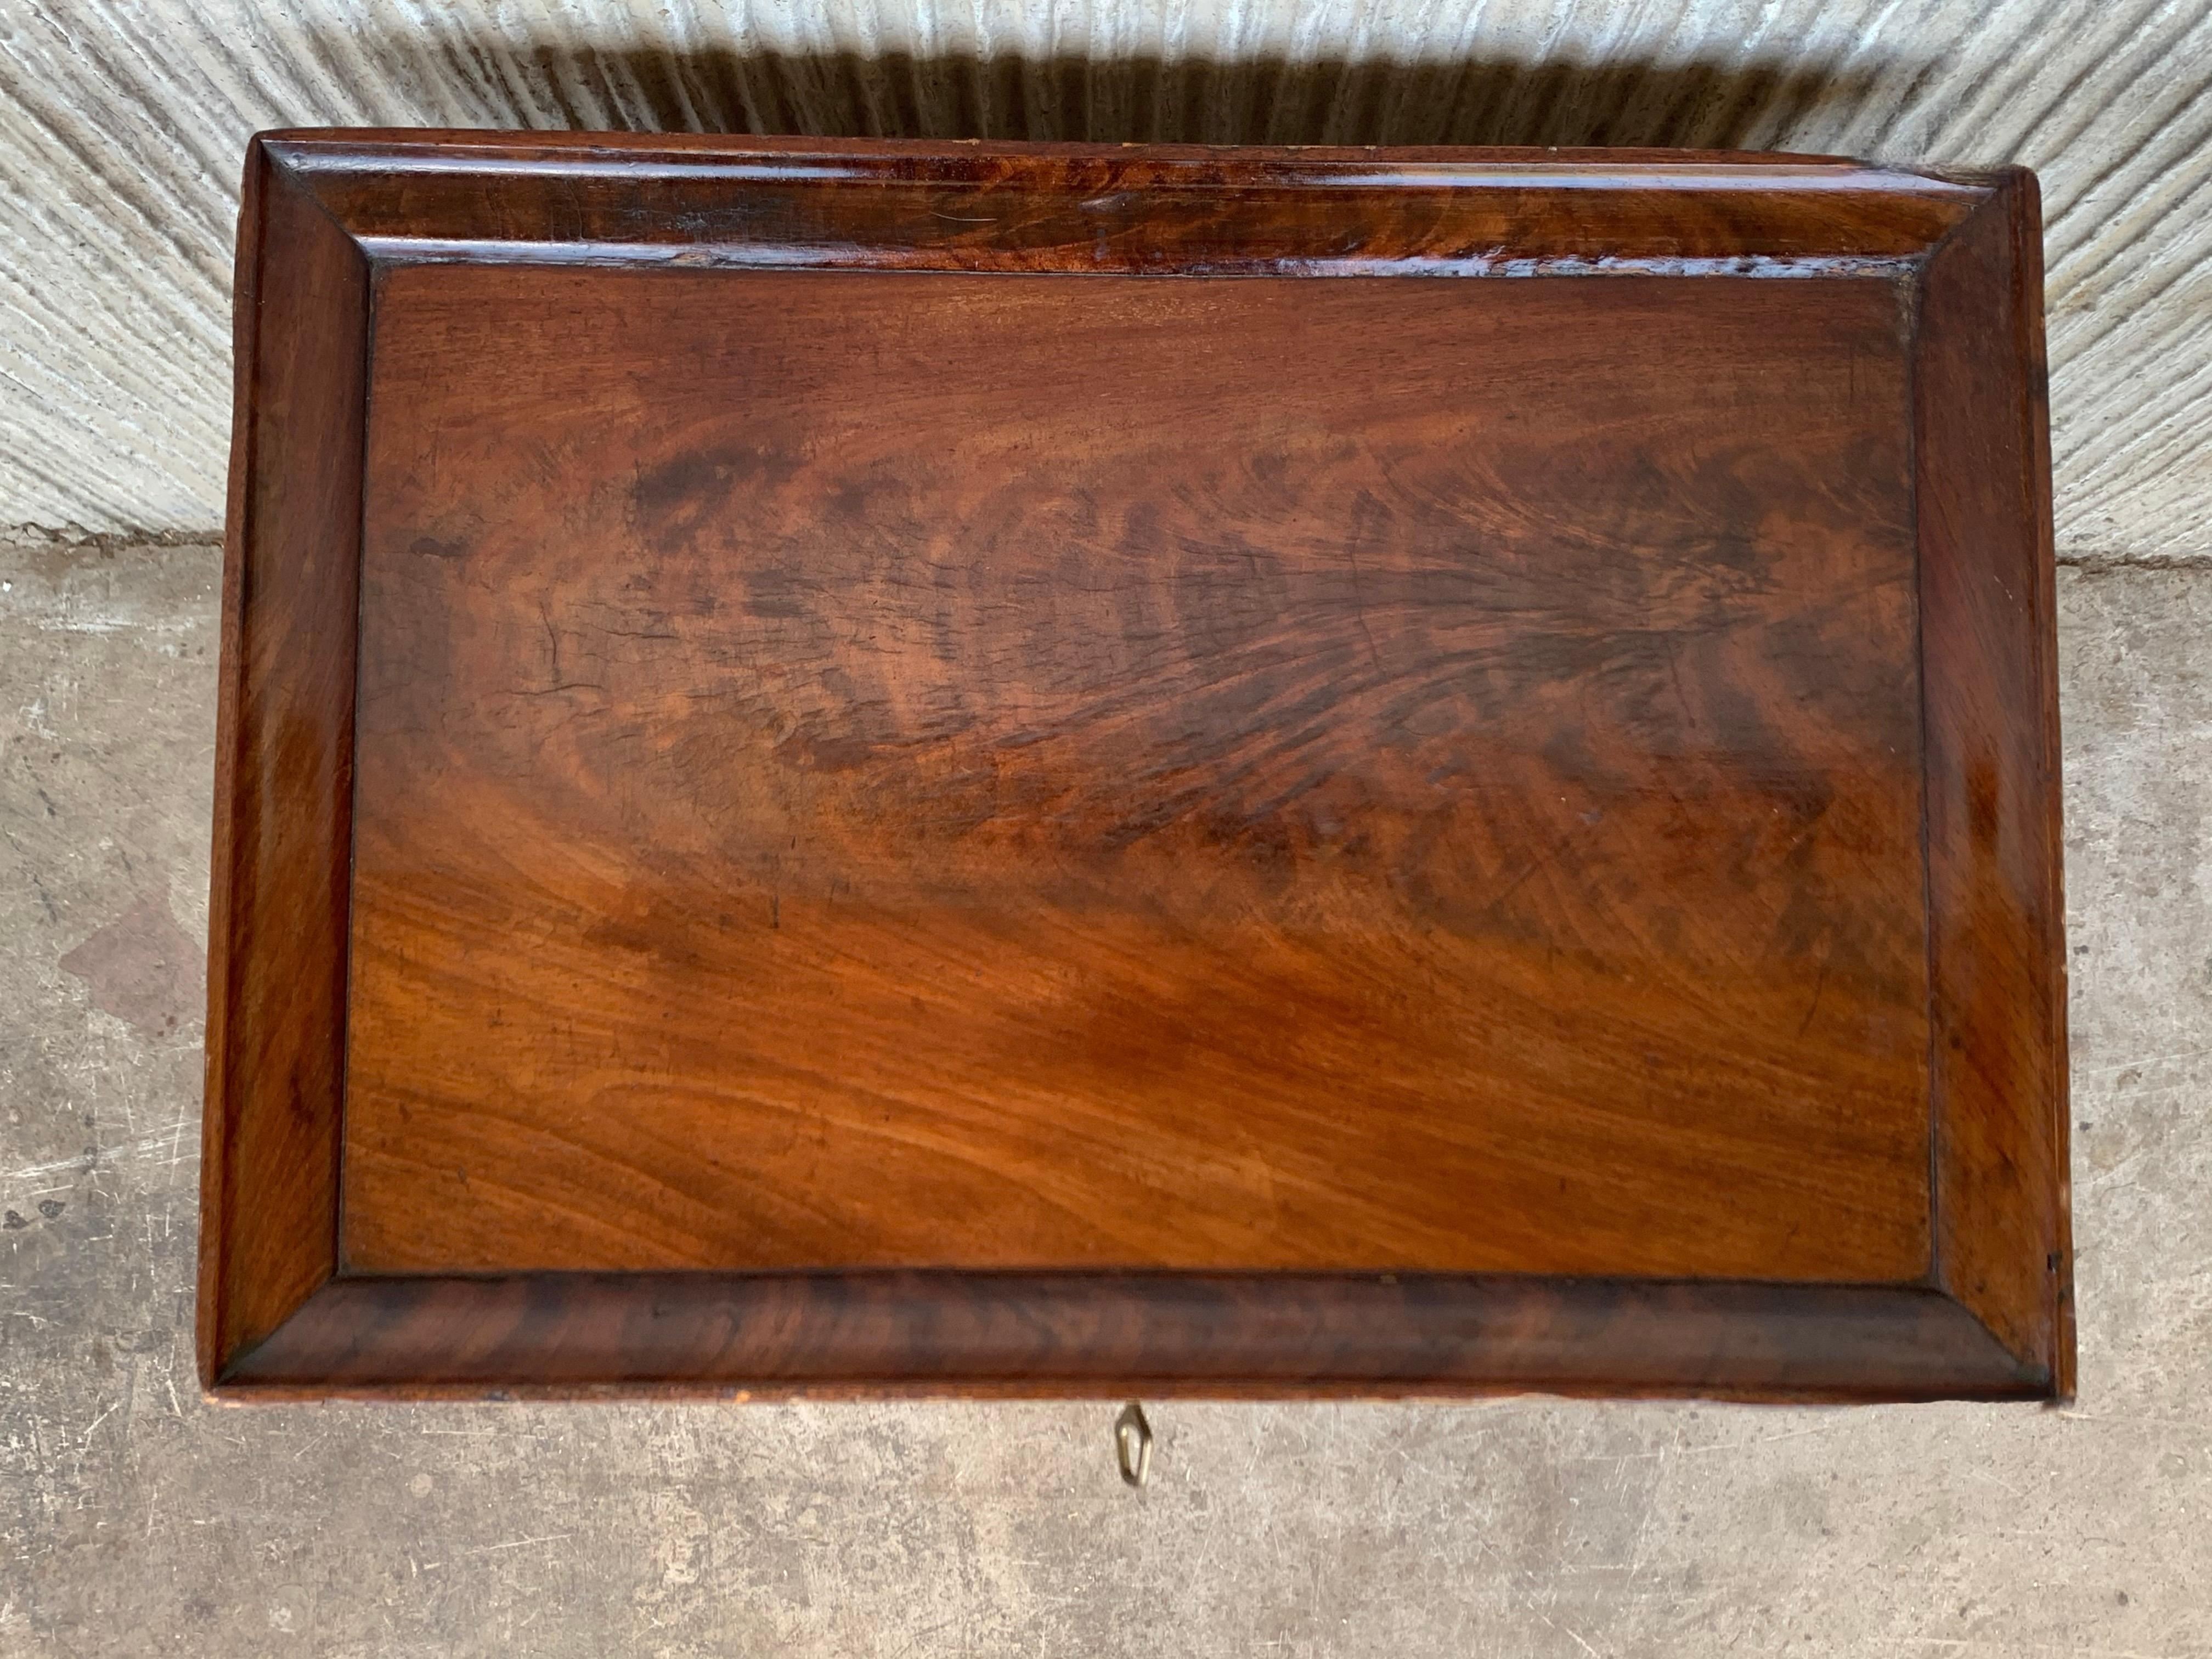 19th Century Antique Victorian C1880 Inlaid Burl Walnut Amboyna Work Side Sewing Table Box For Sale